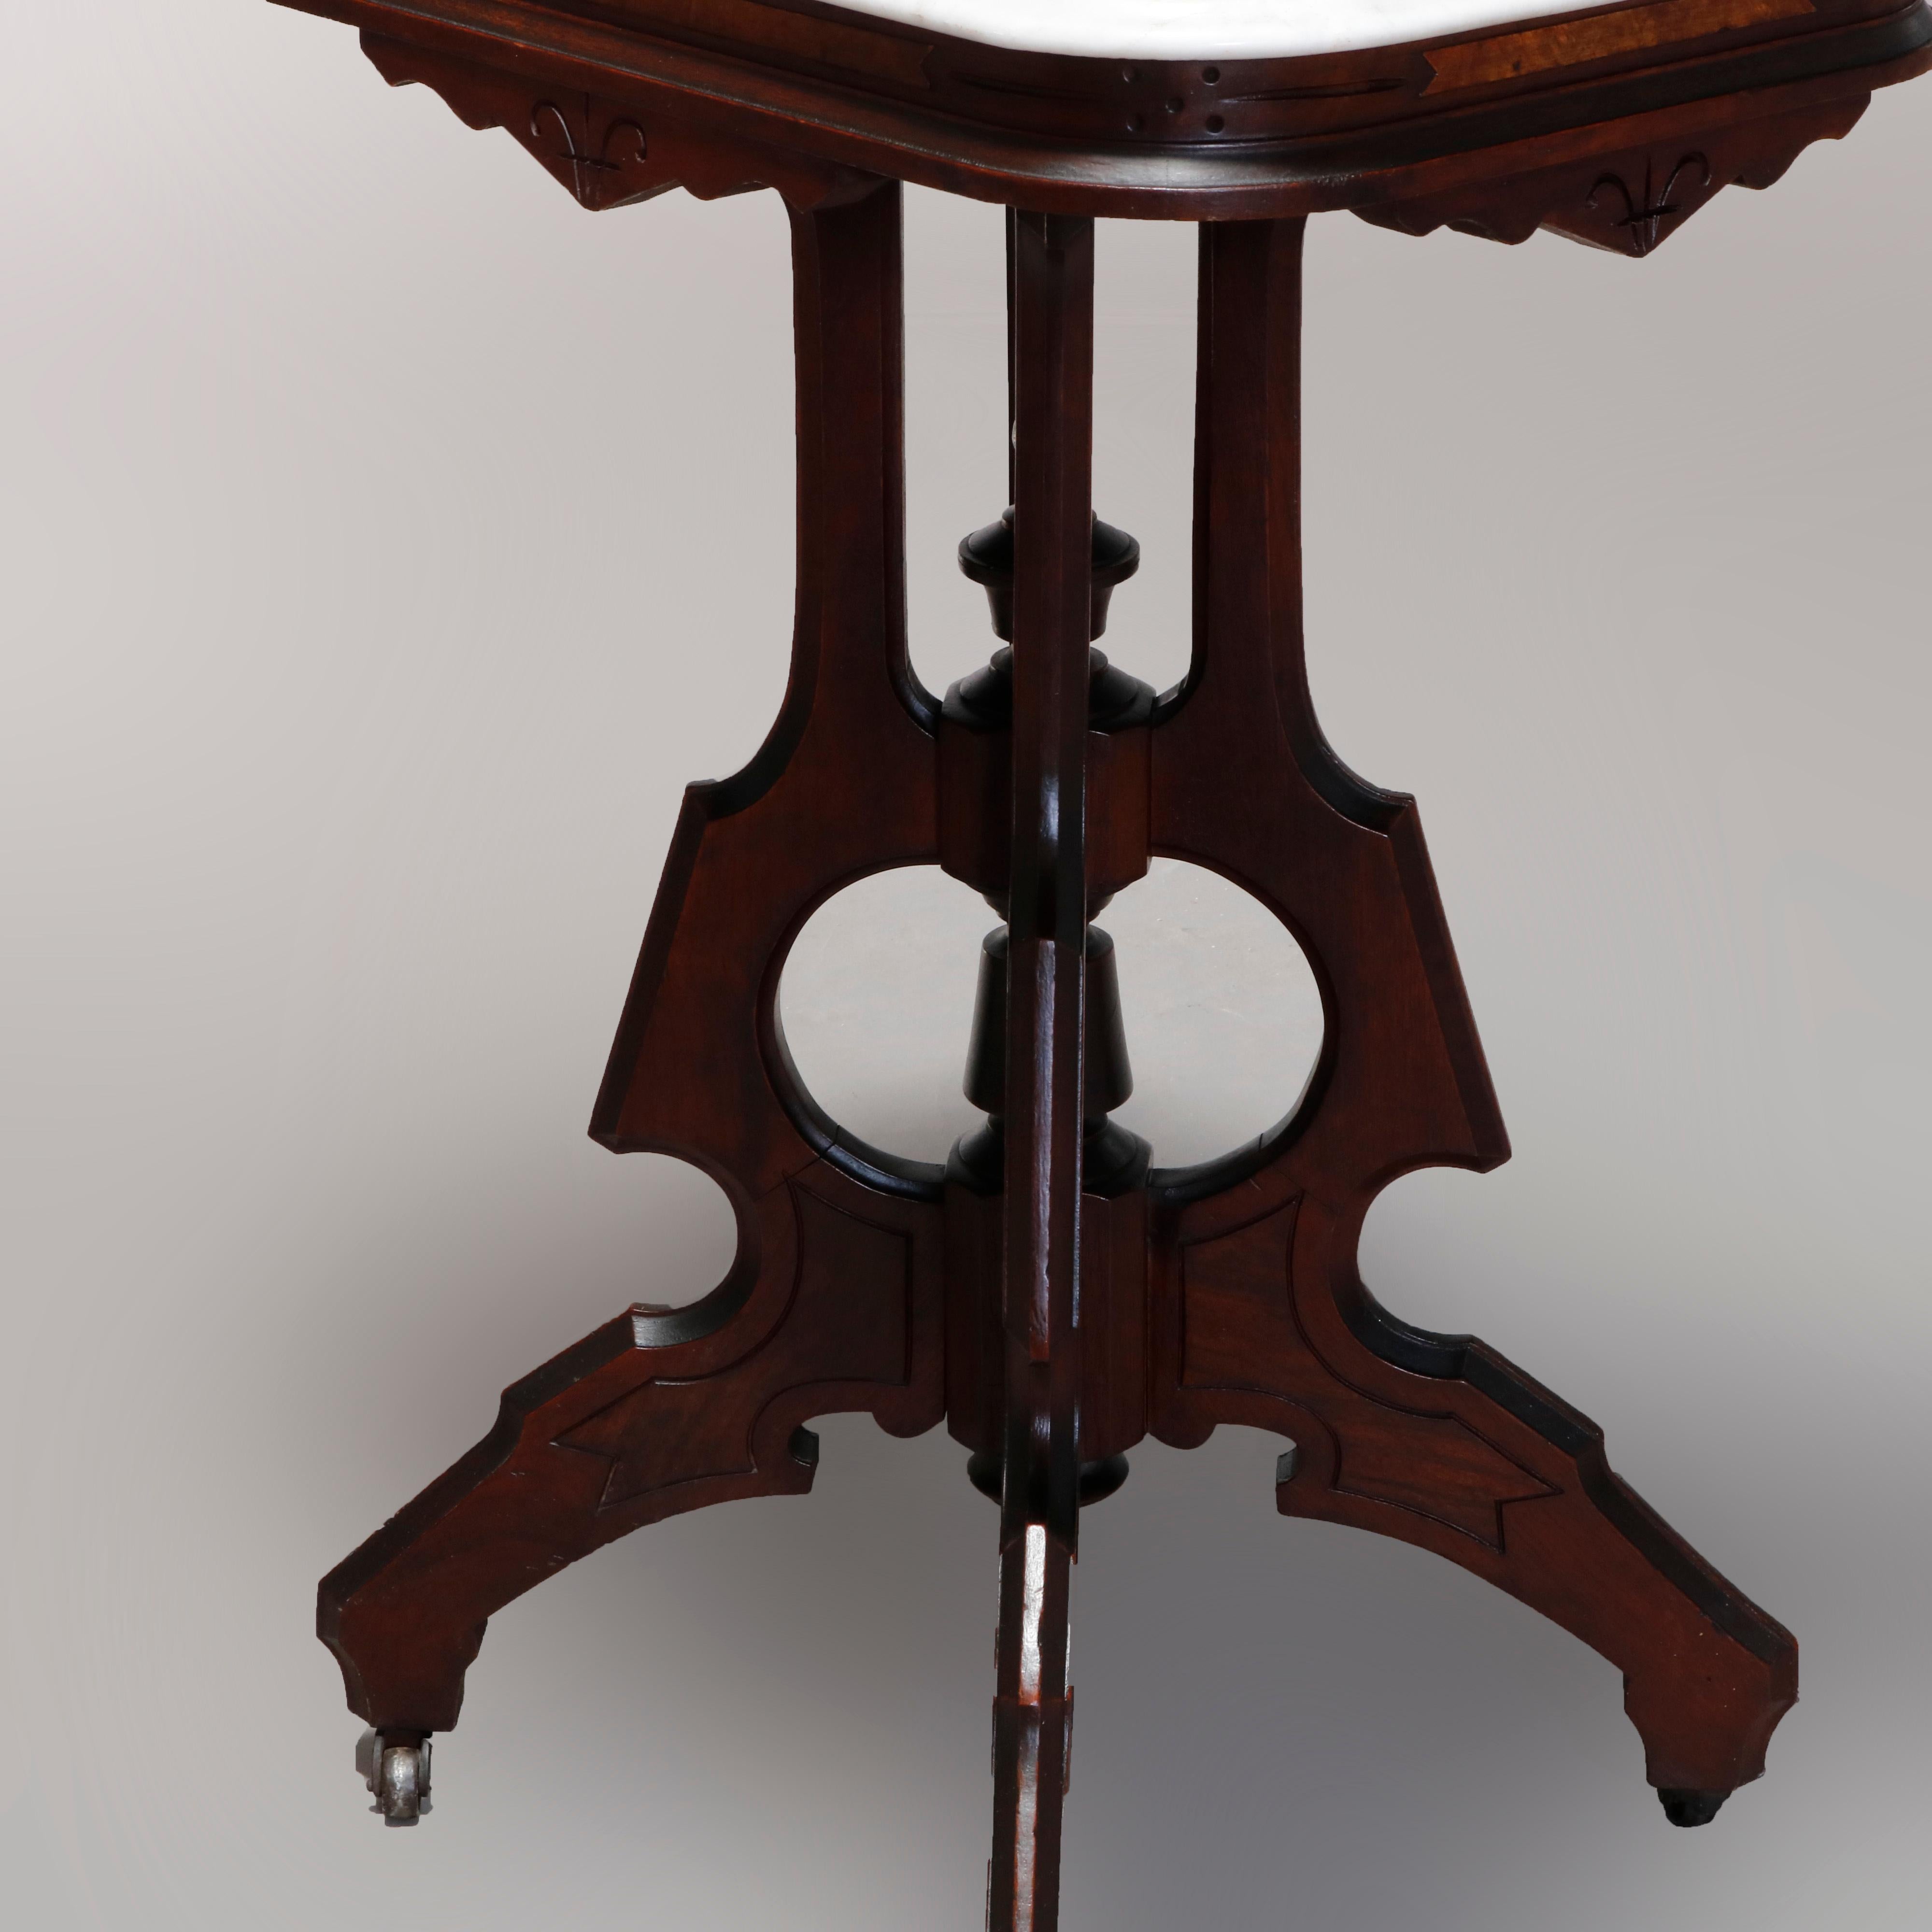 An antique Eastlake side table offers rectangular top surmounting carved walnut base with shaped and scroll incised sh=kirt over four shaped legs surrounding central column with finial and raised on cabriole legs, circa 1890

Measures: 29.75